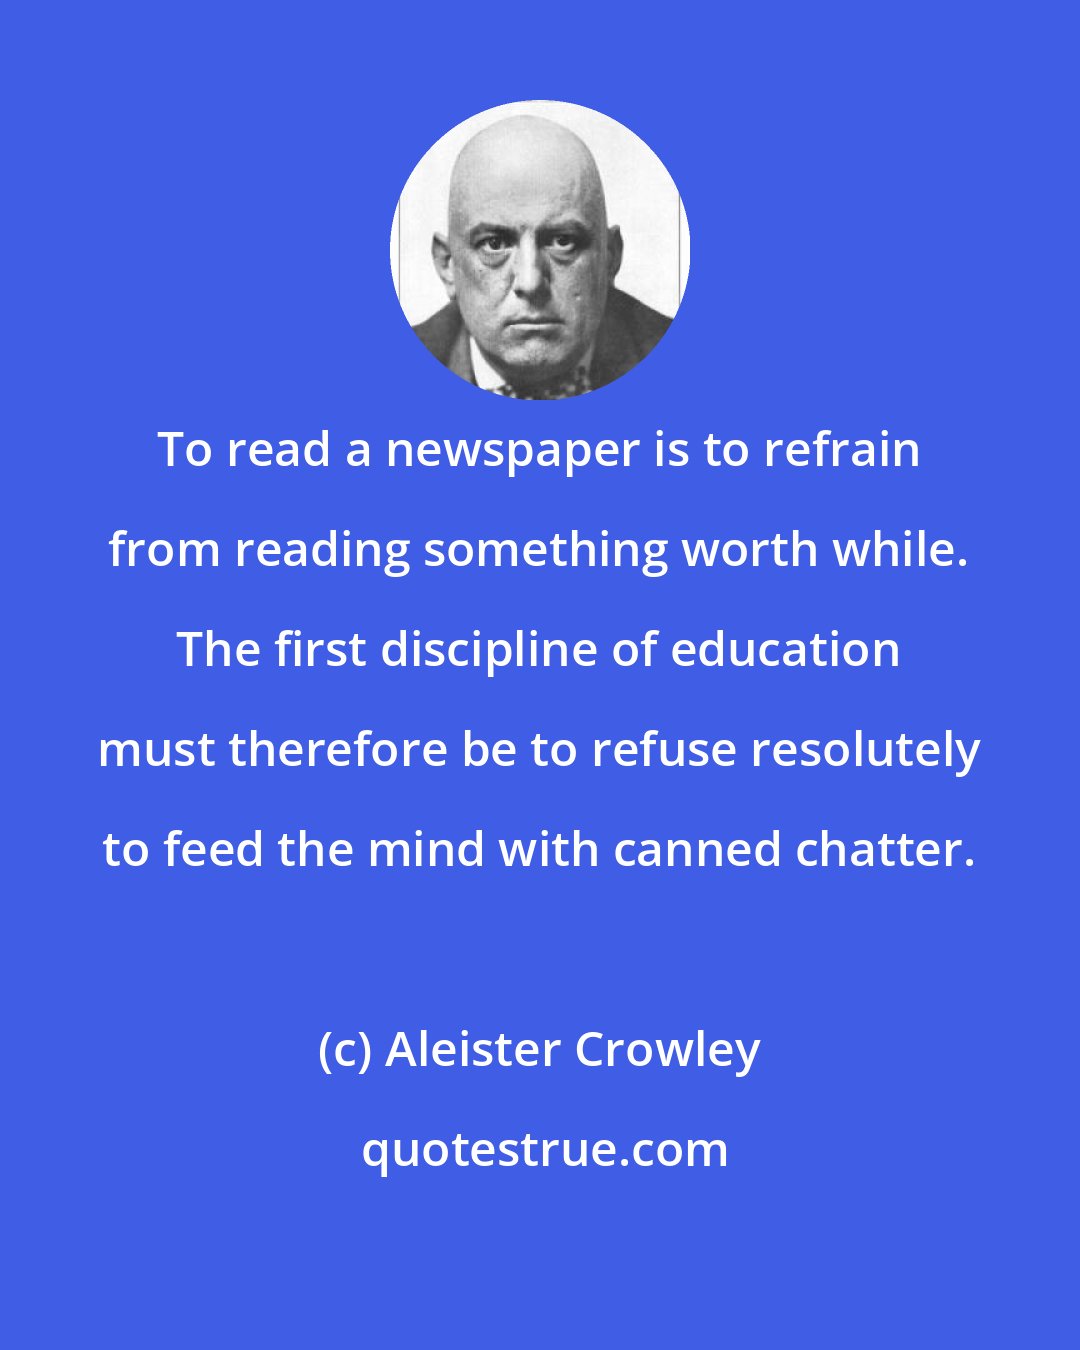 Aleister Crowley: To read a newspaper is to refrain from reading something worth while. The first discipline of education must therefore be to refuse resolutely to feed the mind with canned chatter.